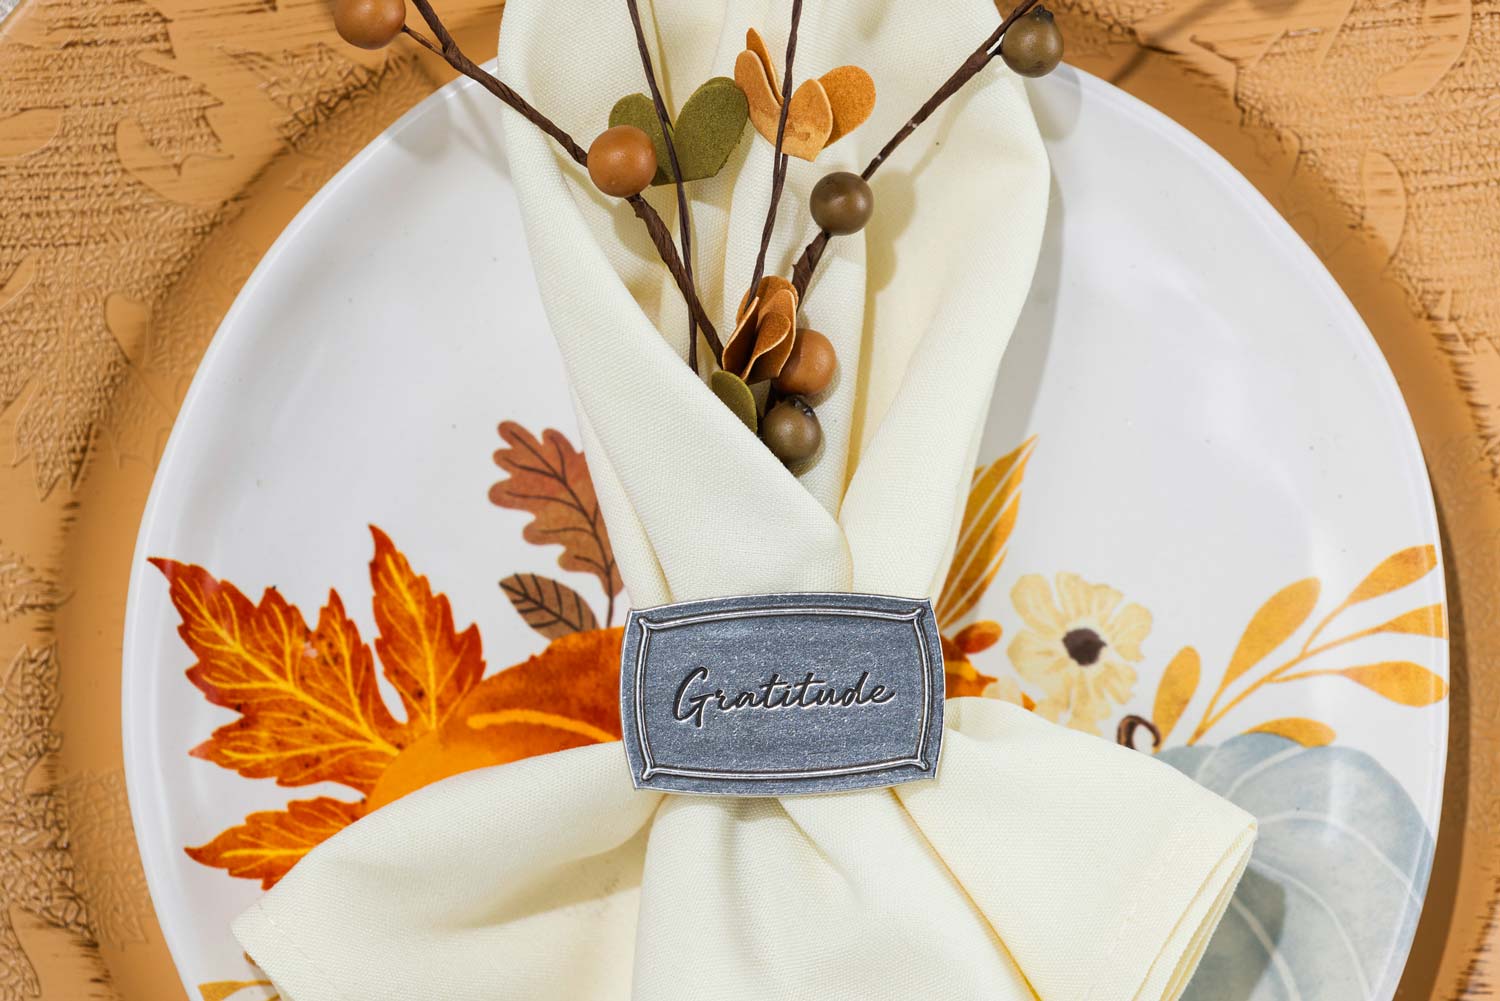 Gratitude napkin ring on a napkn on a plate